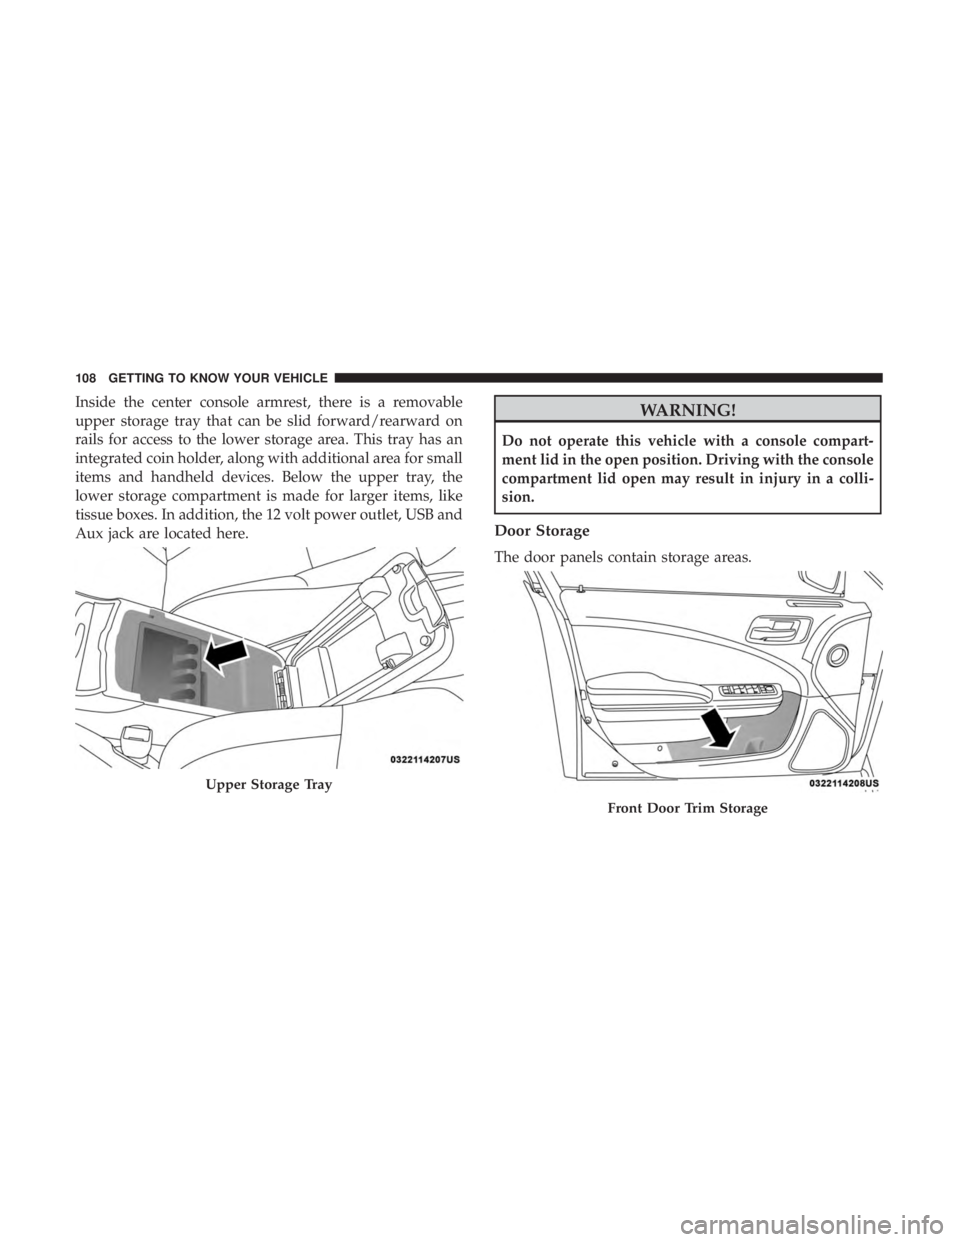 CHRYSLER 300 2019  Owners Manual Inside the center console armrest, there is a removable
upper storage tray that can be slid forward/rearward on
rails for access to the lower storage area. This tray has an
integrated coin holder, alo